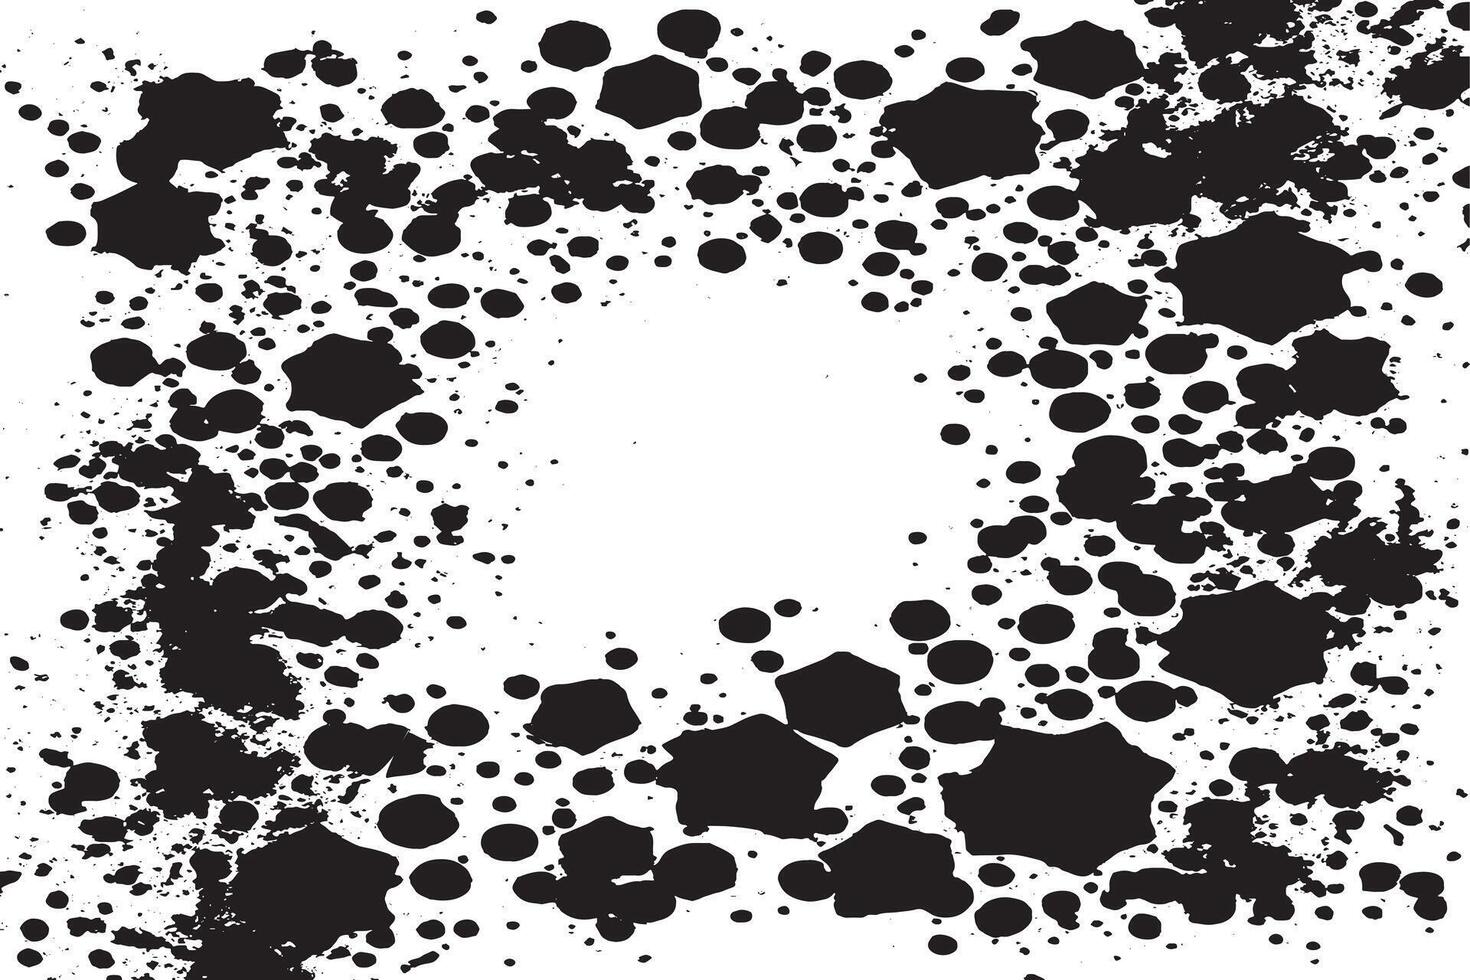 black grunge monochrome texture vector template for background texture. abstract texture